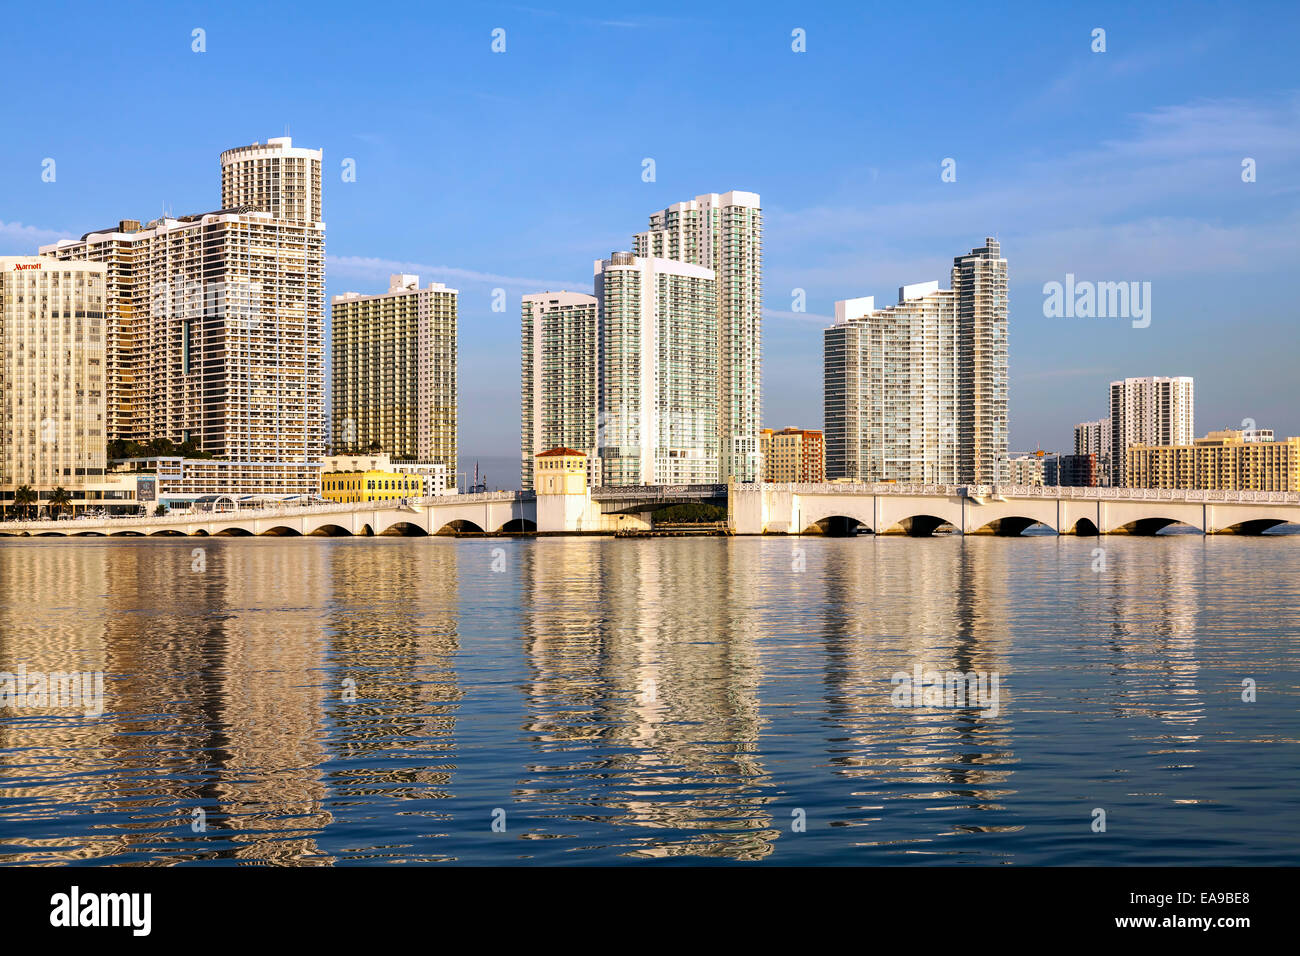 The historic Venetian Causeway bascule bridge arches it's way across Biscayne Bay with the Miami skyline beyond, Florida, USA. Stock Photo